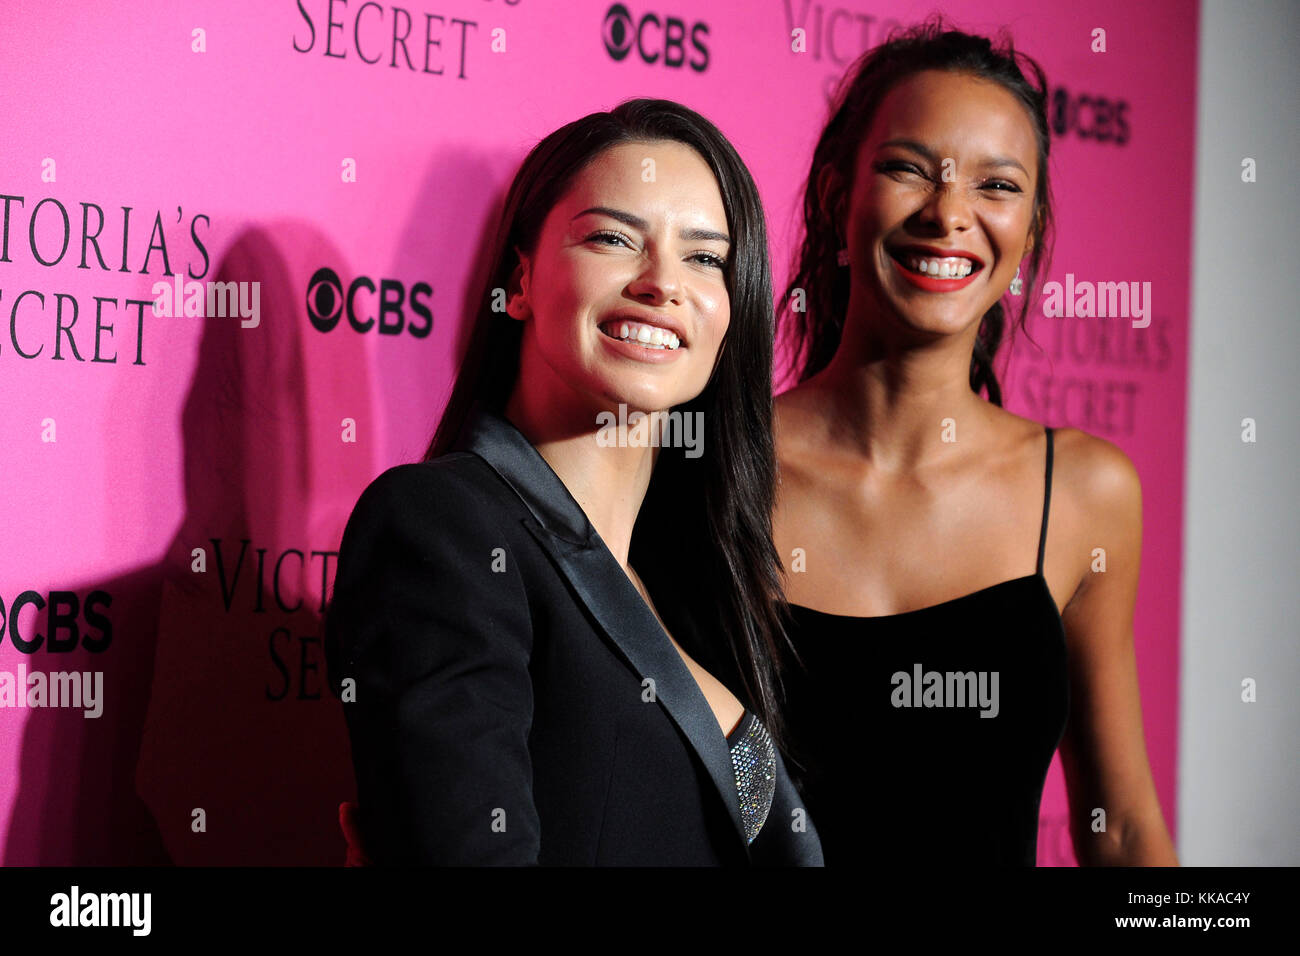 New York, USA. 28th Nov, 2017. Adriana Lima and Lais Ribeiro attend the 2017 Victoria's Secret Fashion Show viewing party pink carpet at Spring Studios on November 28, 2017 in New York City. Credit: Geisler-Fotopress/Alamy Live News Stock Photo